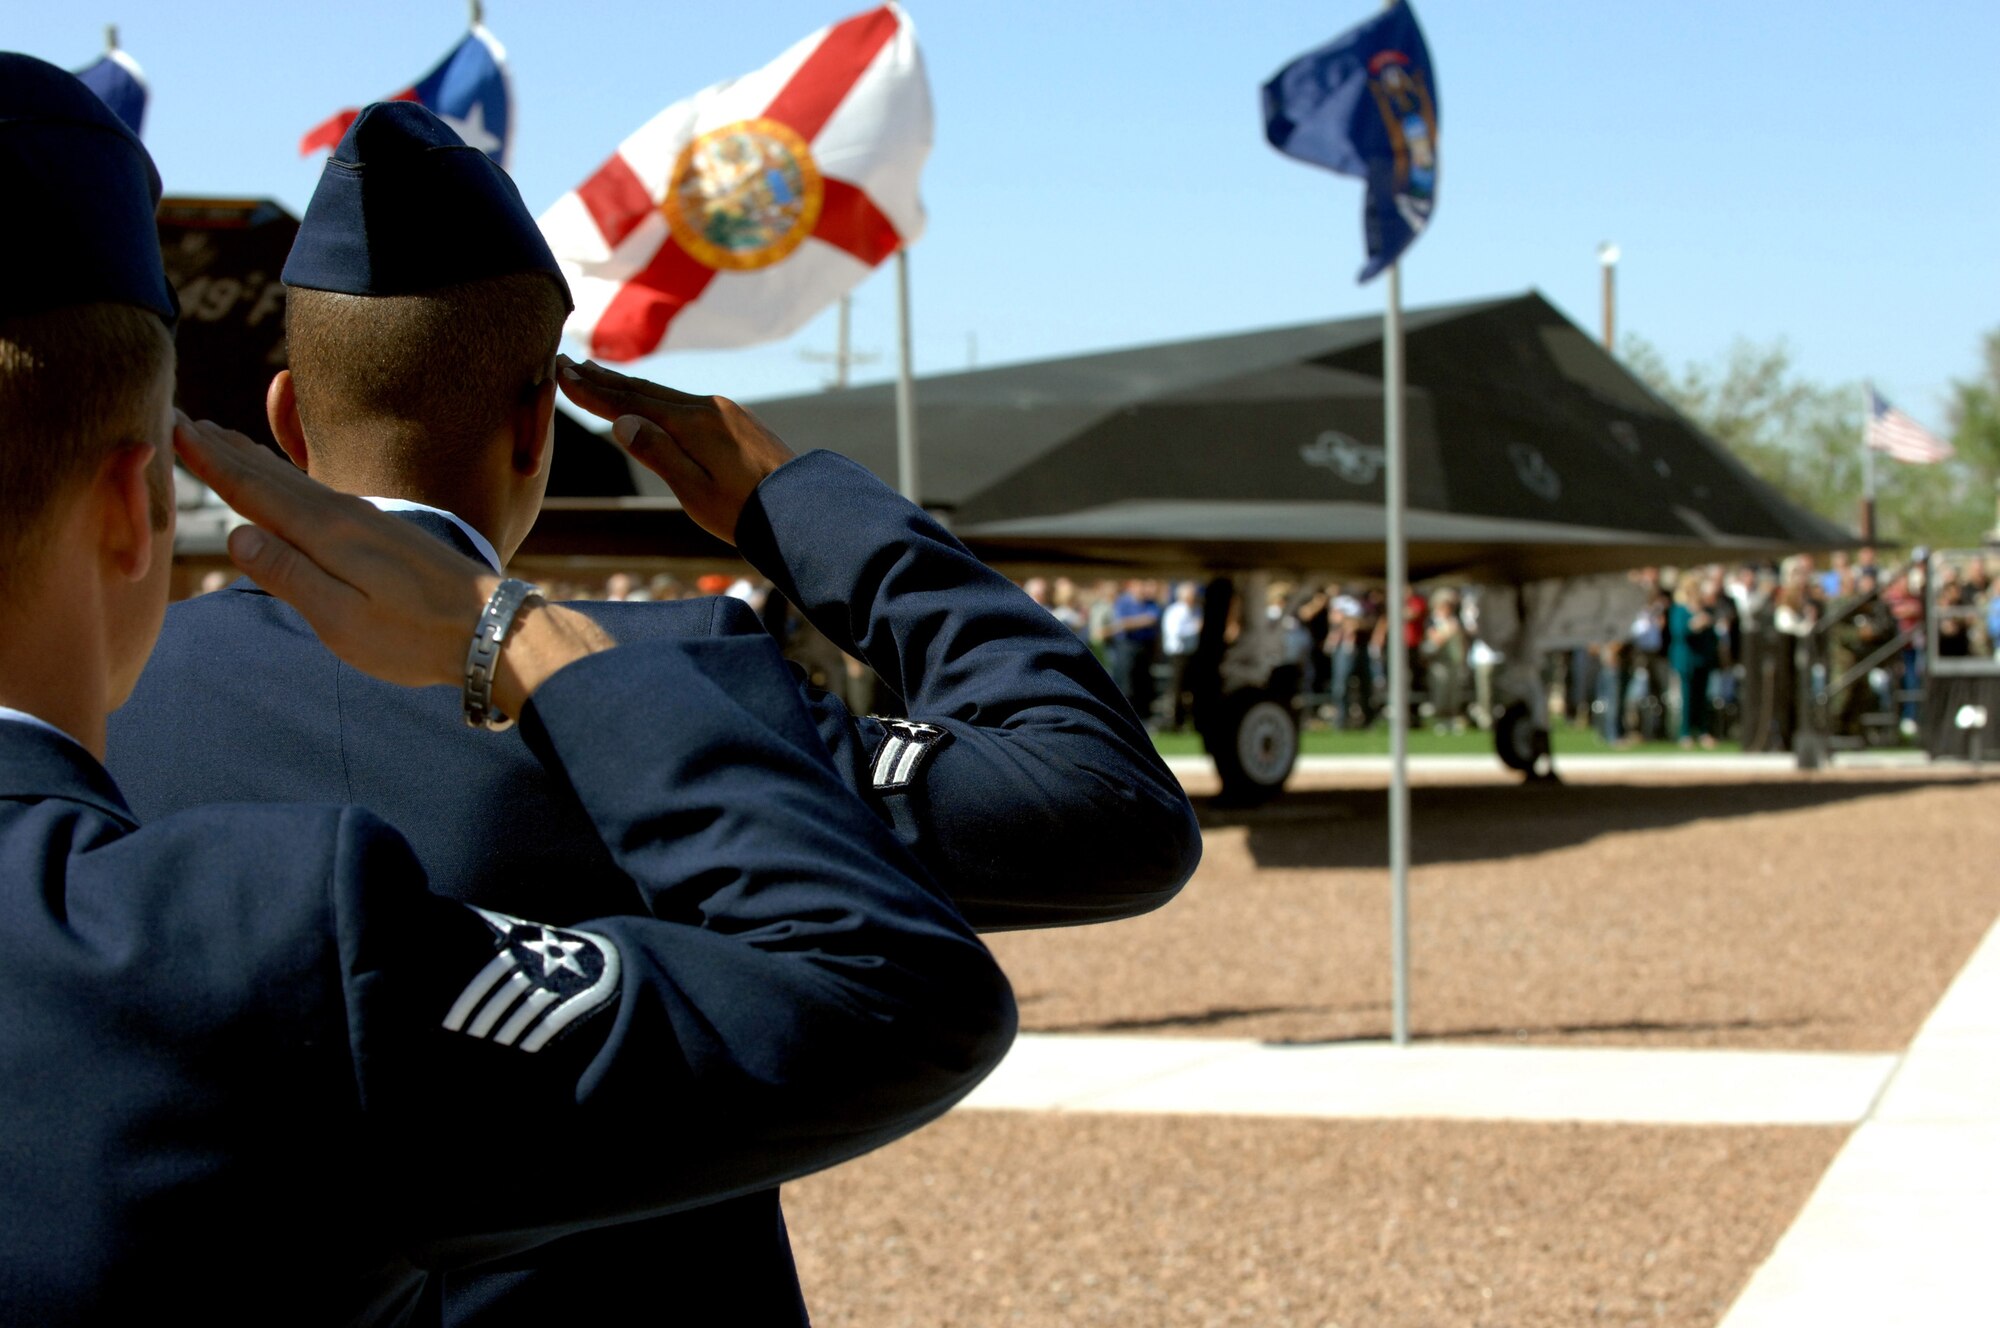 Airmen from Team Holloman salute during the Sunset Stealth F-117A Retirement Ceremony Apr 21, Holloman Air Force Base, N.M.
(U.S. Air Force photo/ Senior Airman Anthony Nelson Jr)

